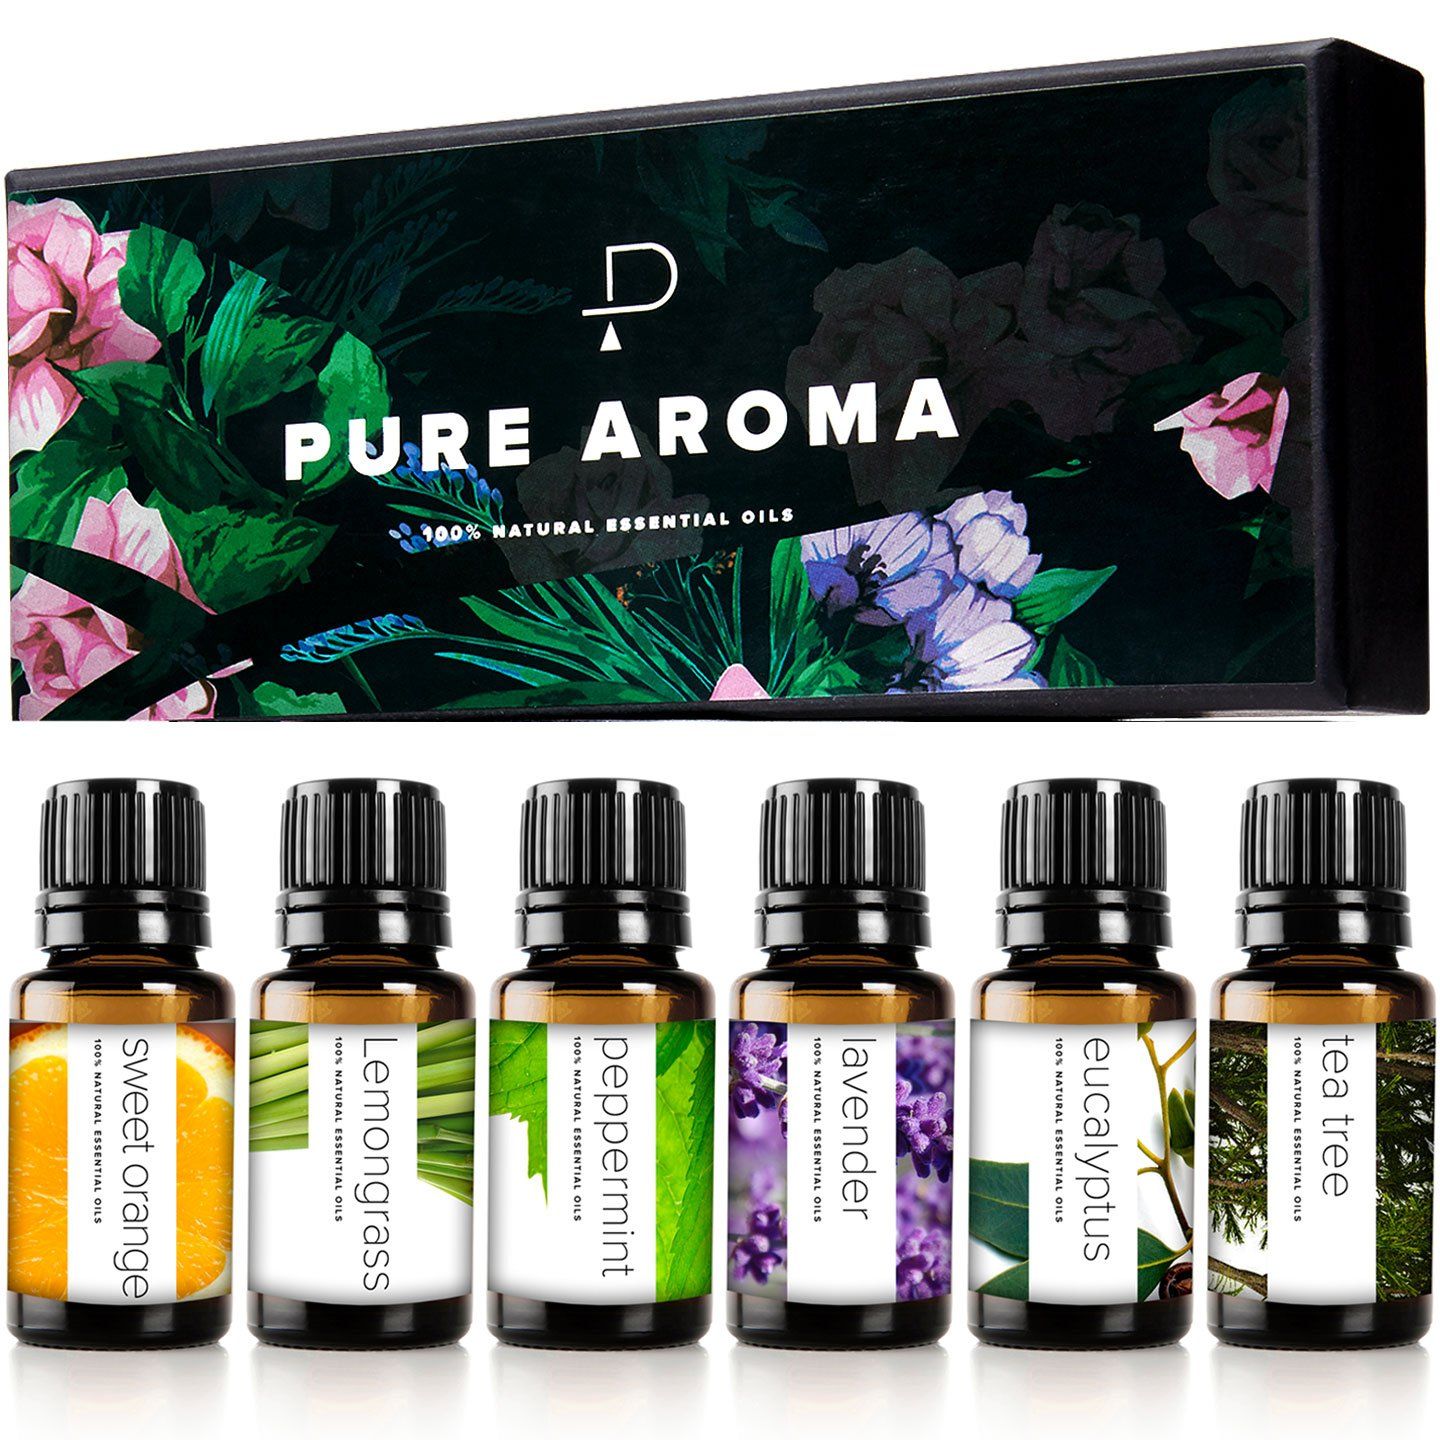 10 Best Essential Oils of 2021 ReviewThis